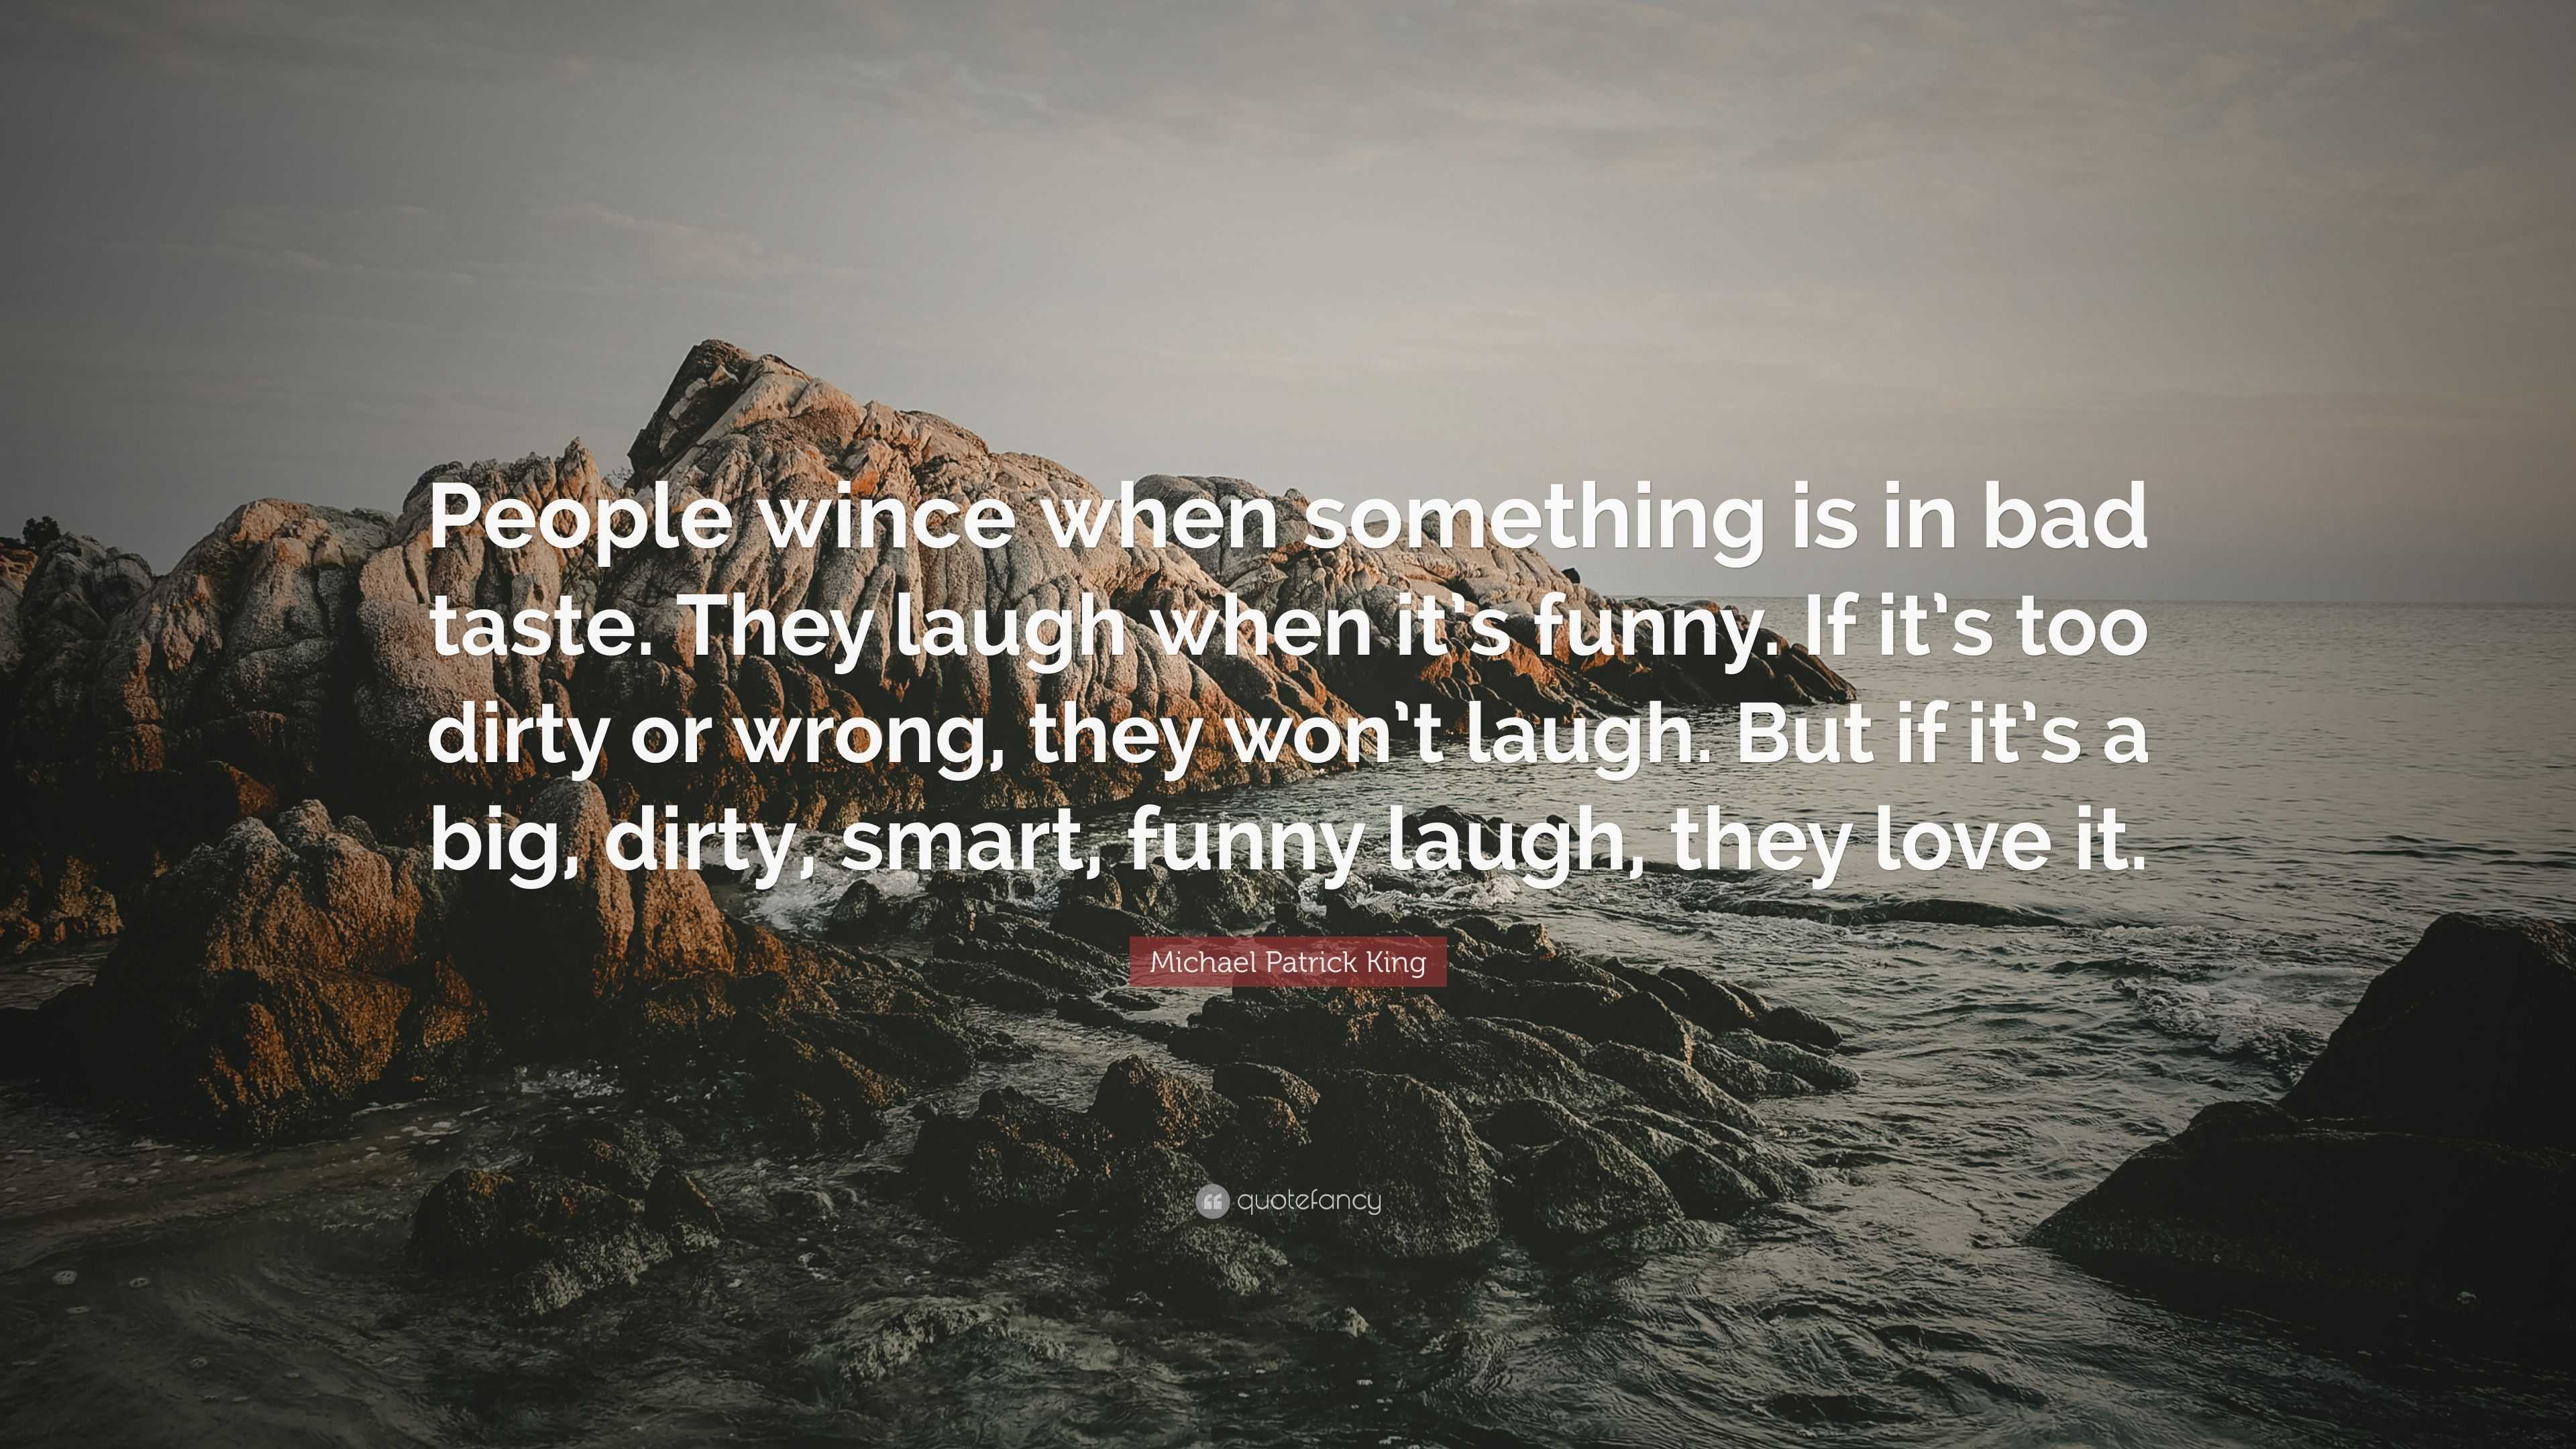 Michael Patrick King Quote: “People wince when something is in bad taste.  They laugh when it's funny. If it's too dirty or wrong, they won't laugh.  B...”